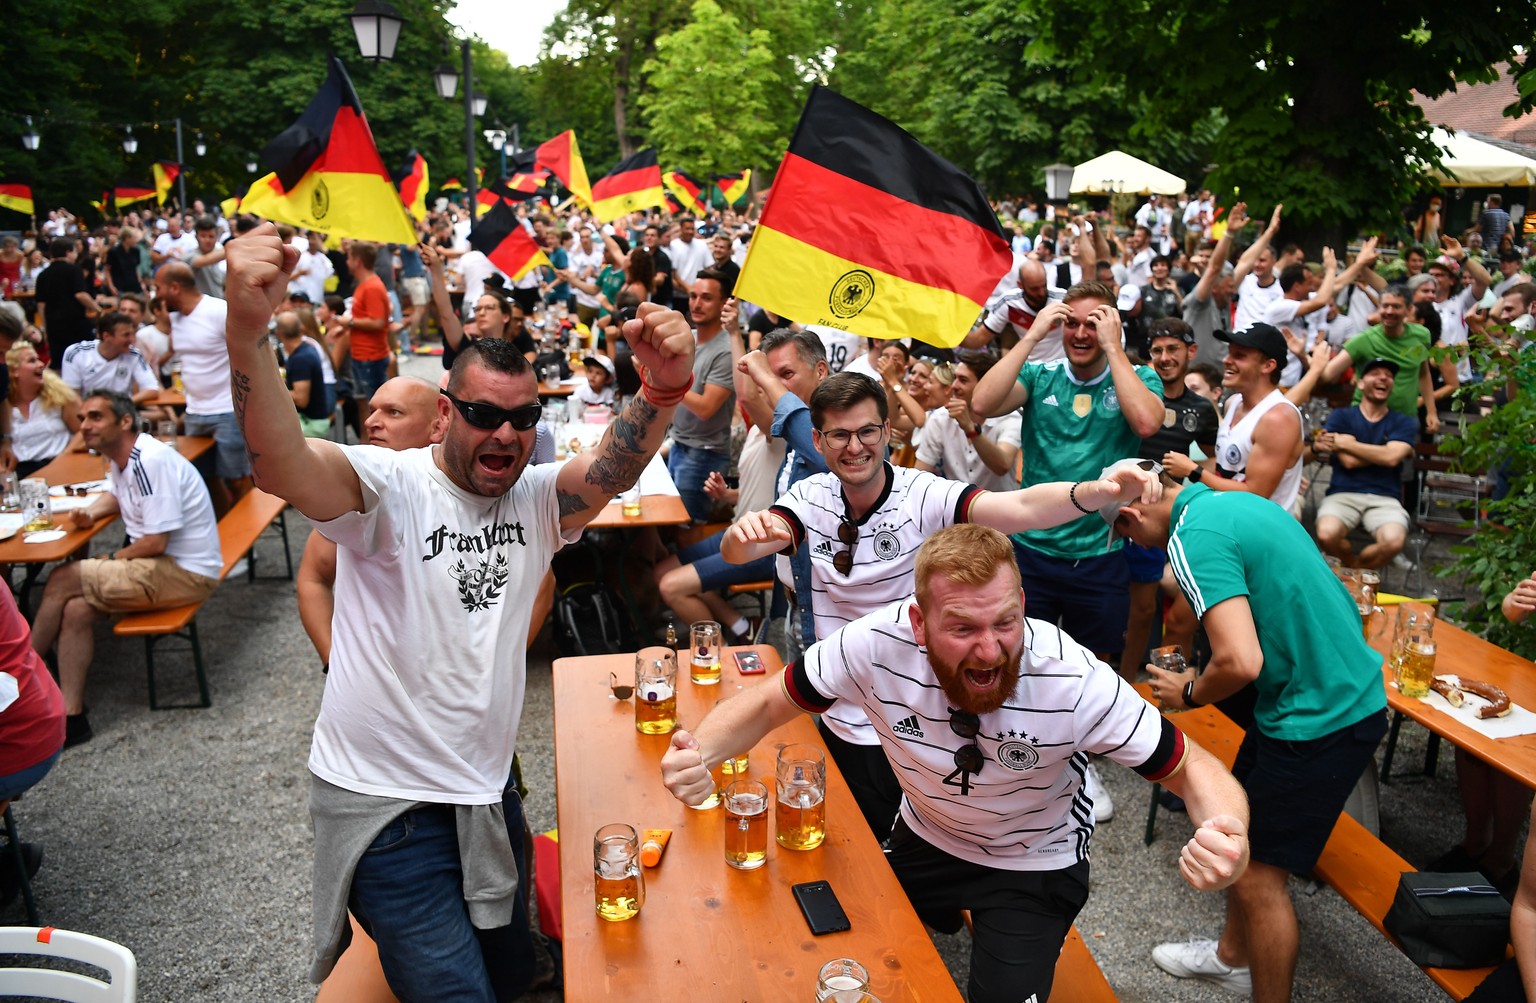 epa09286726 German Fans celebrate a goal at a beer garden during the UEFA EURO 2020 group F preliminary round soccer match between Portugal and Germany in Munich, Germany, 19 June 2021. EPA/LUKAS BART ...